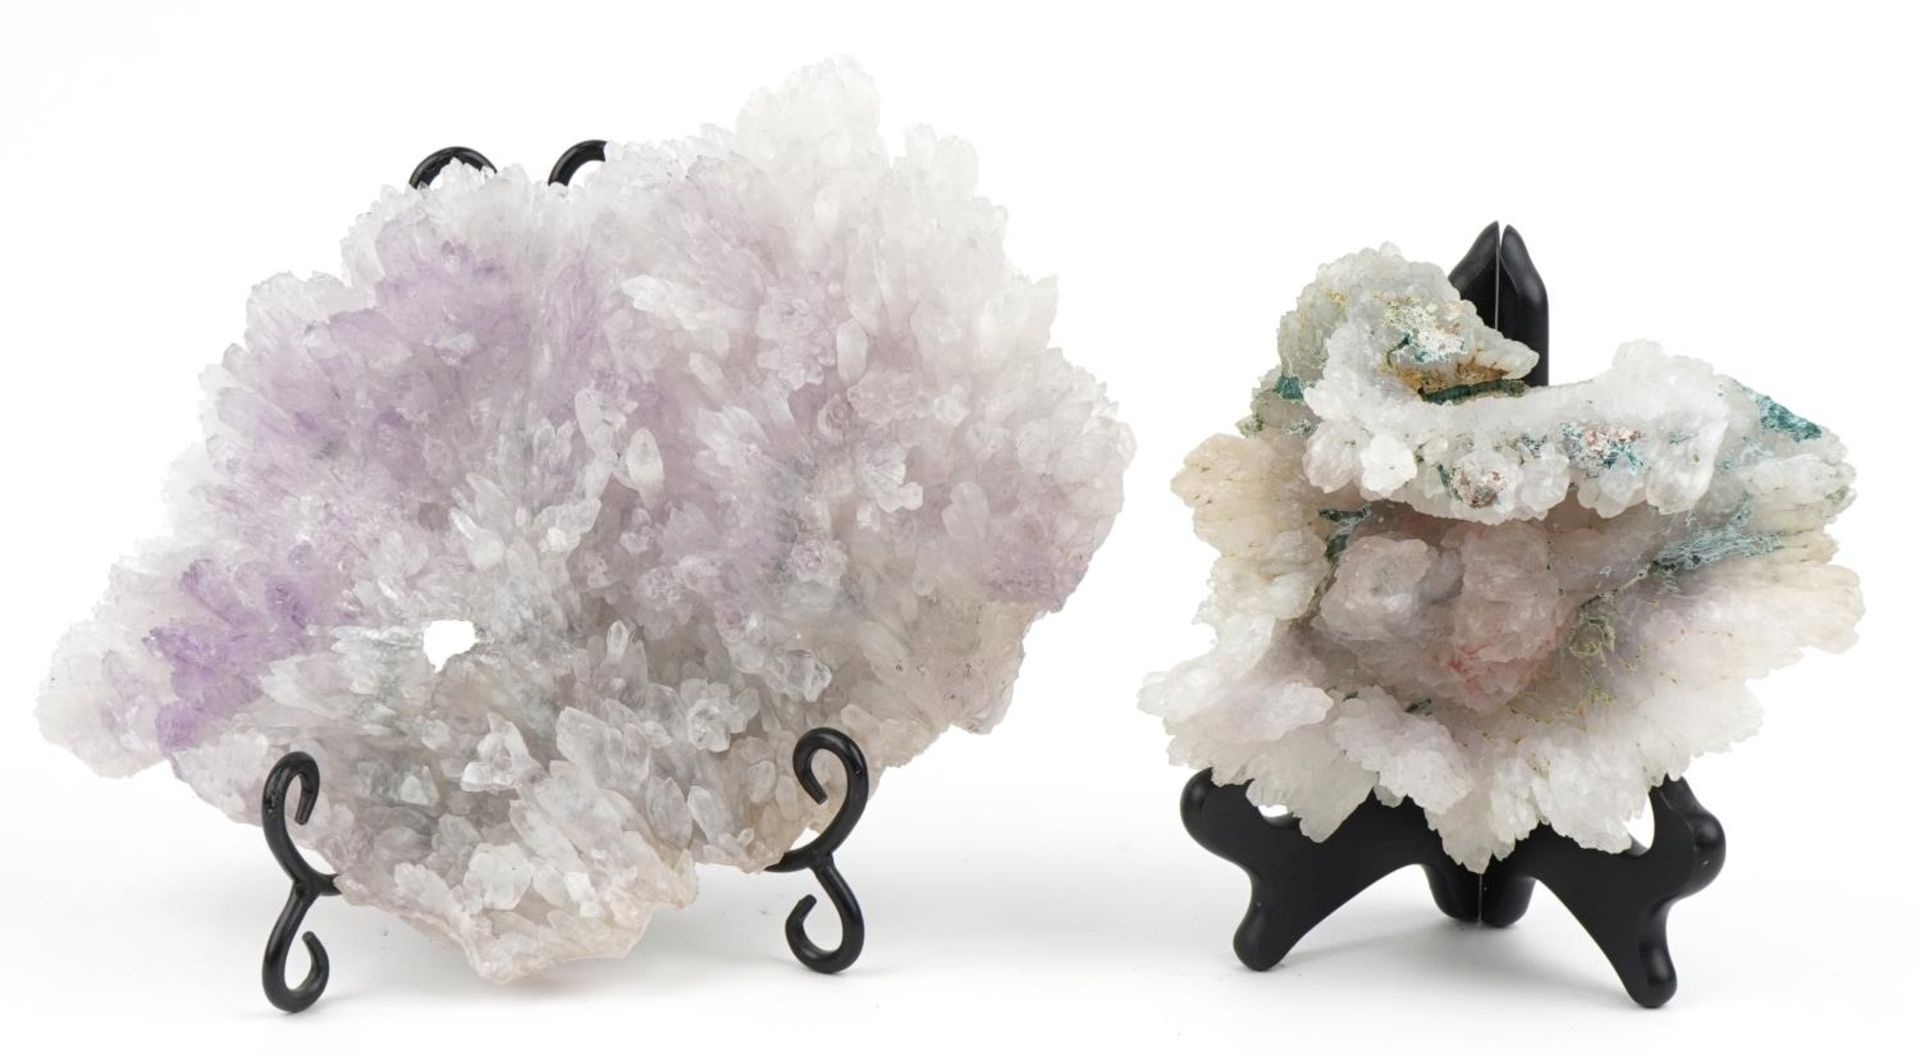 Large geology interest natural history rose amethyst specimen and a similar example, the largest